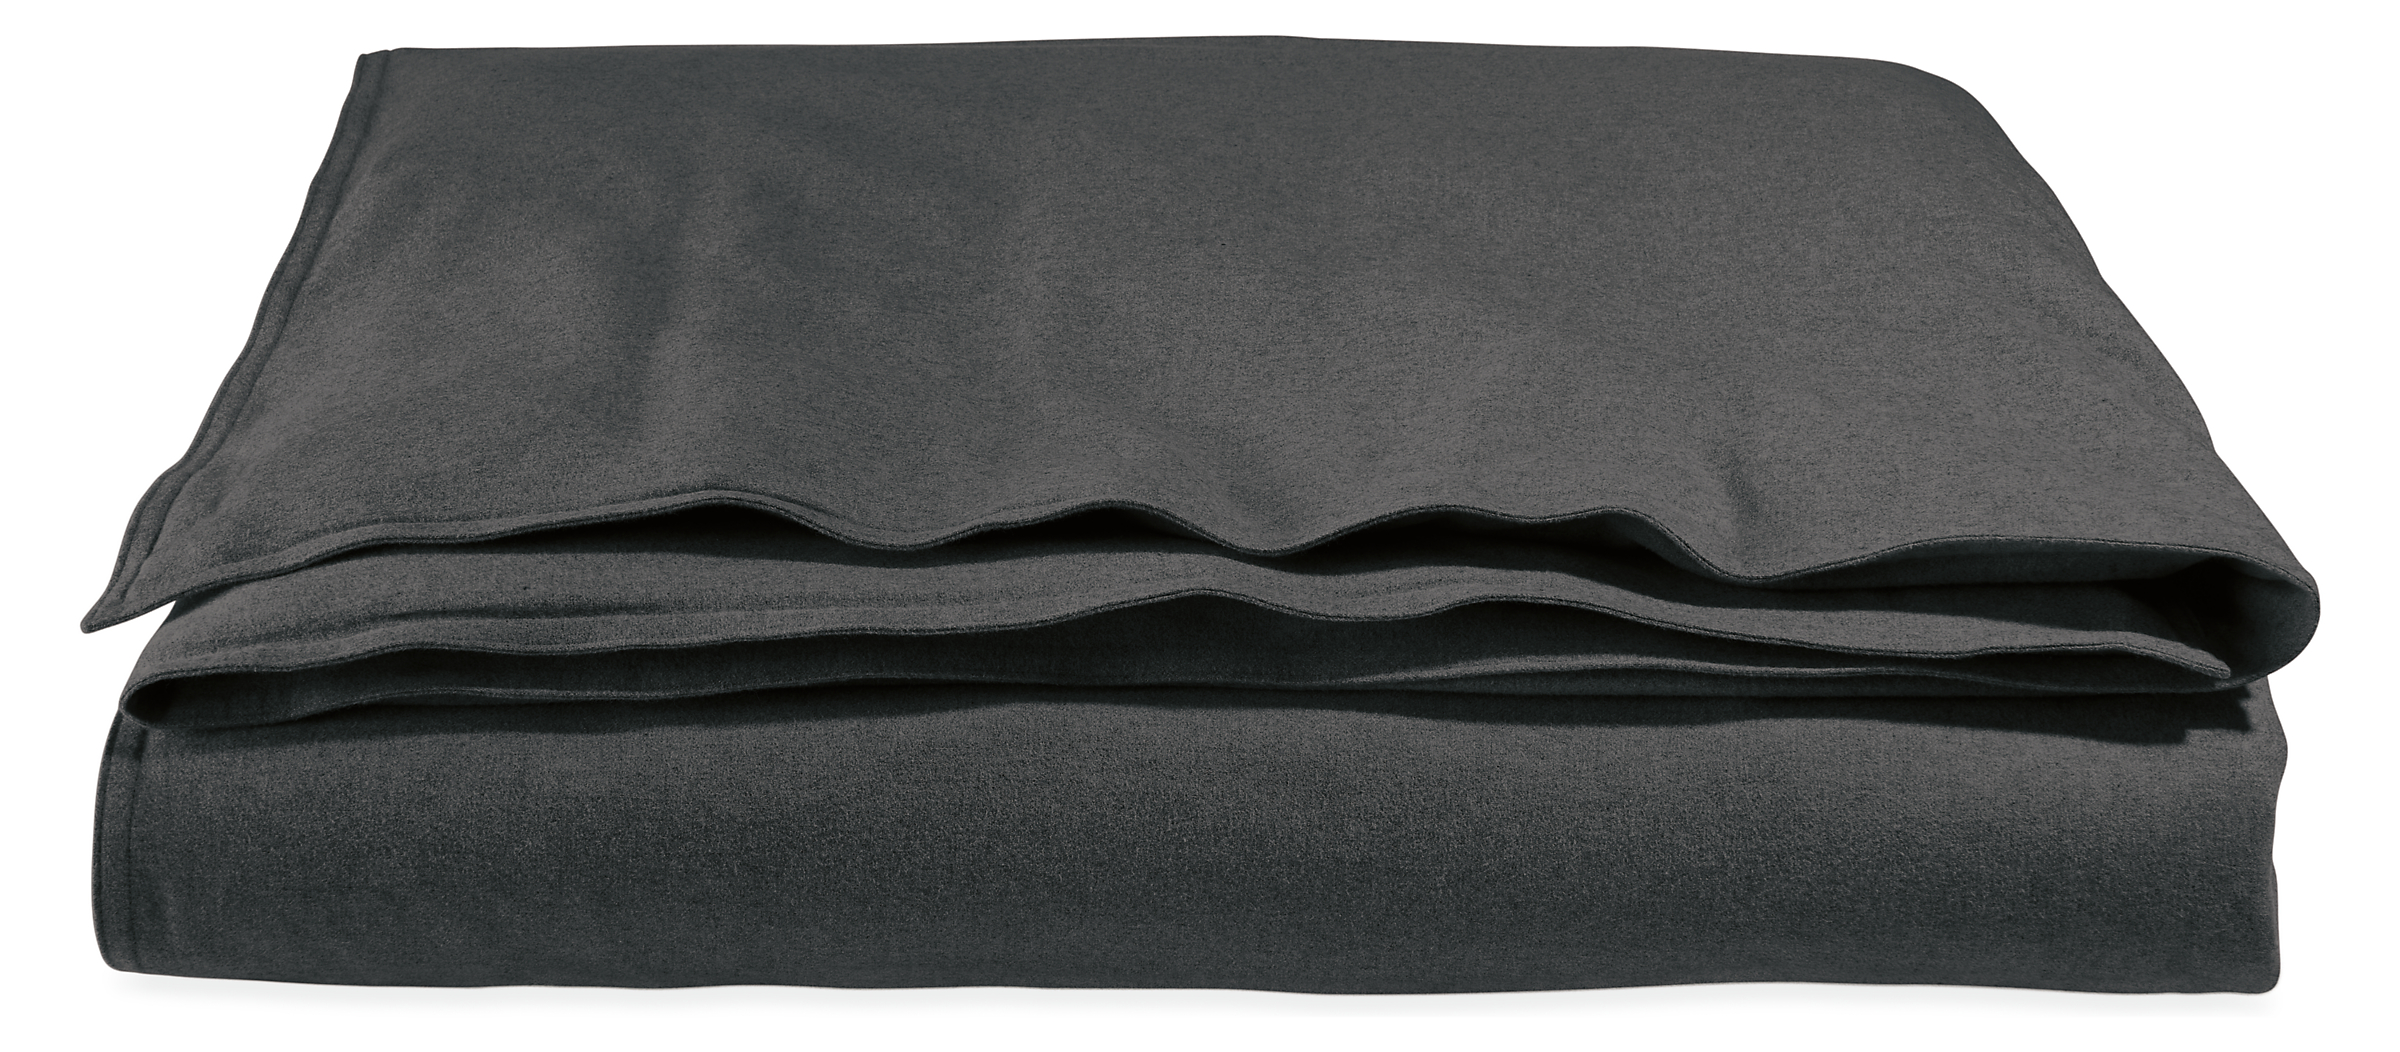 Heathered Flannel Full/Queen Duvet Cover in Charcoal